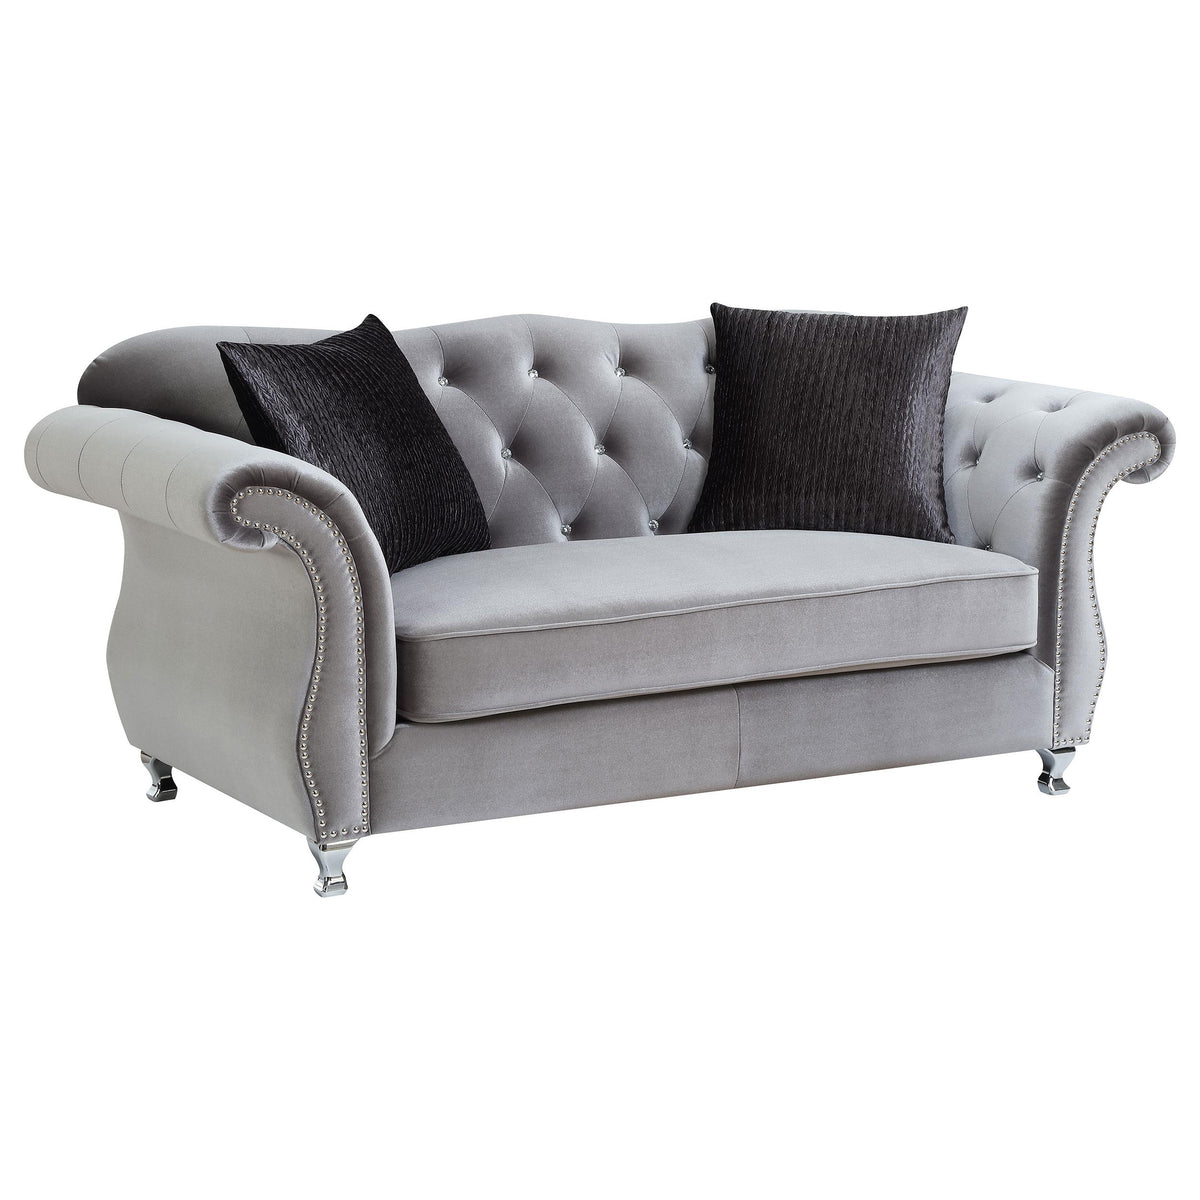 Frostine Button Tufted Loveseat Silver Frostine Button Tufted Loveseat Silver Half Price Furniture